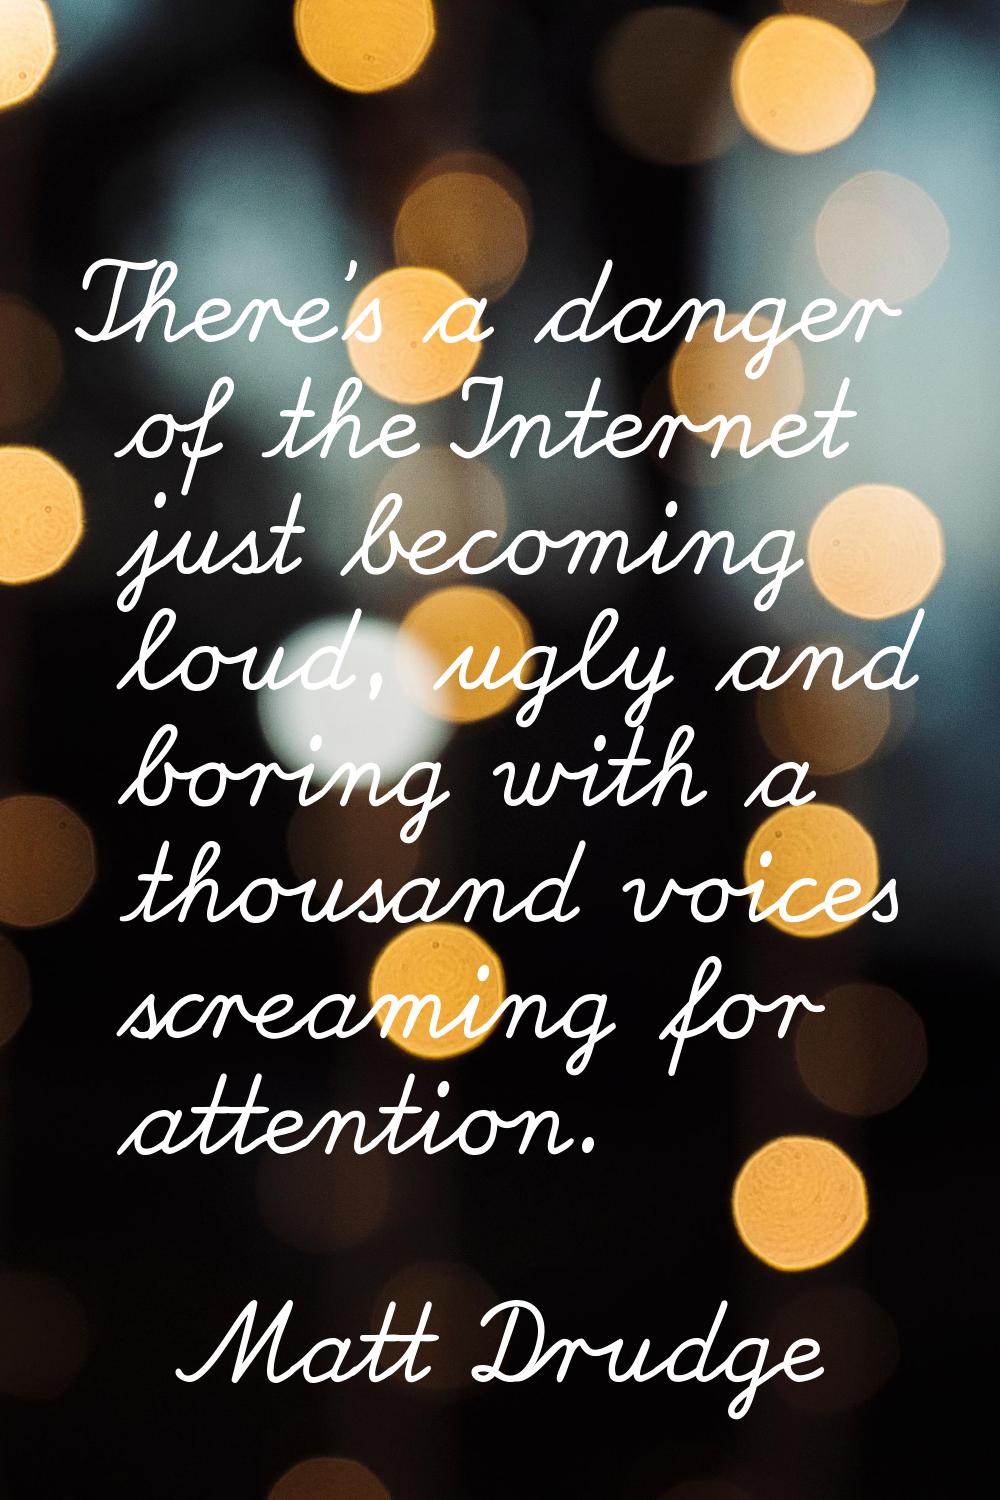 There's a danger of the Internet just becoming loud, ugly and boring with a thousand voices screami